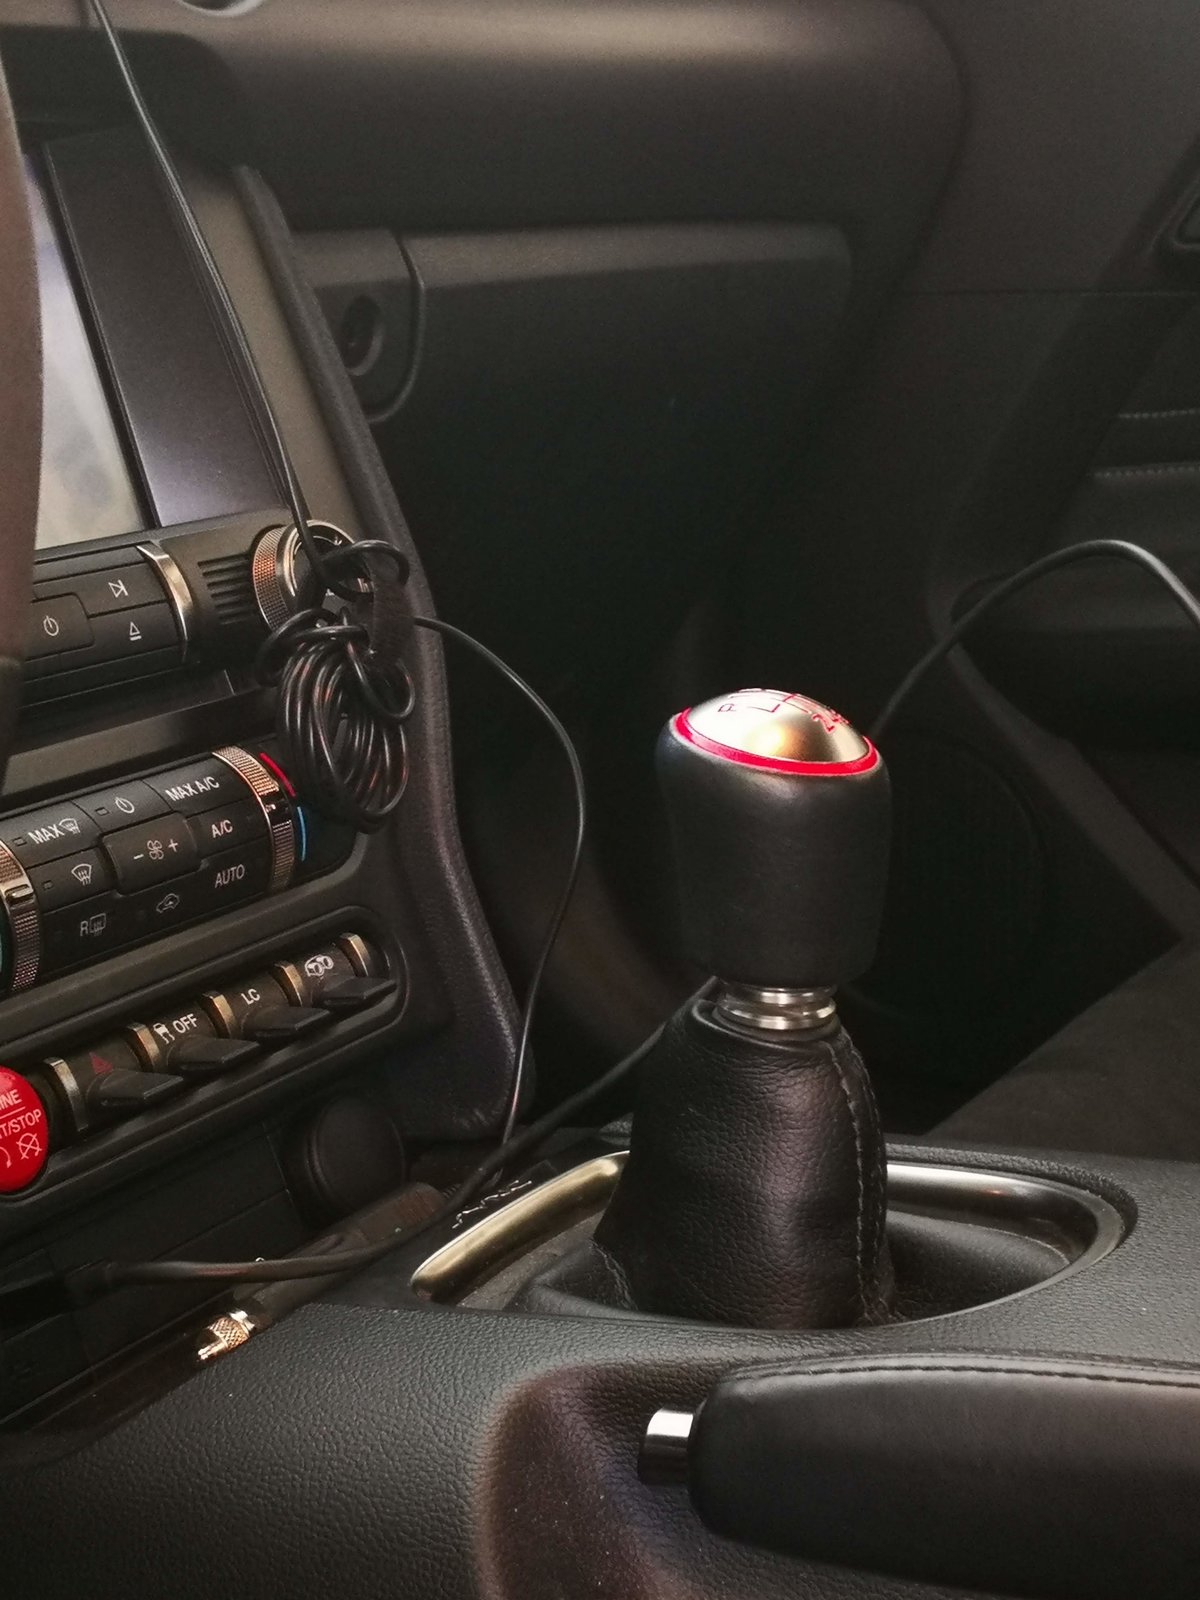 MGW Shifter with Stock knob 2019 06 17.jpg